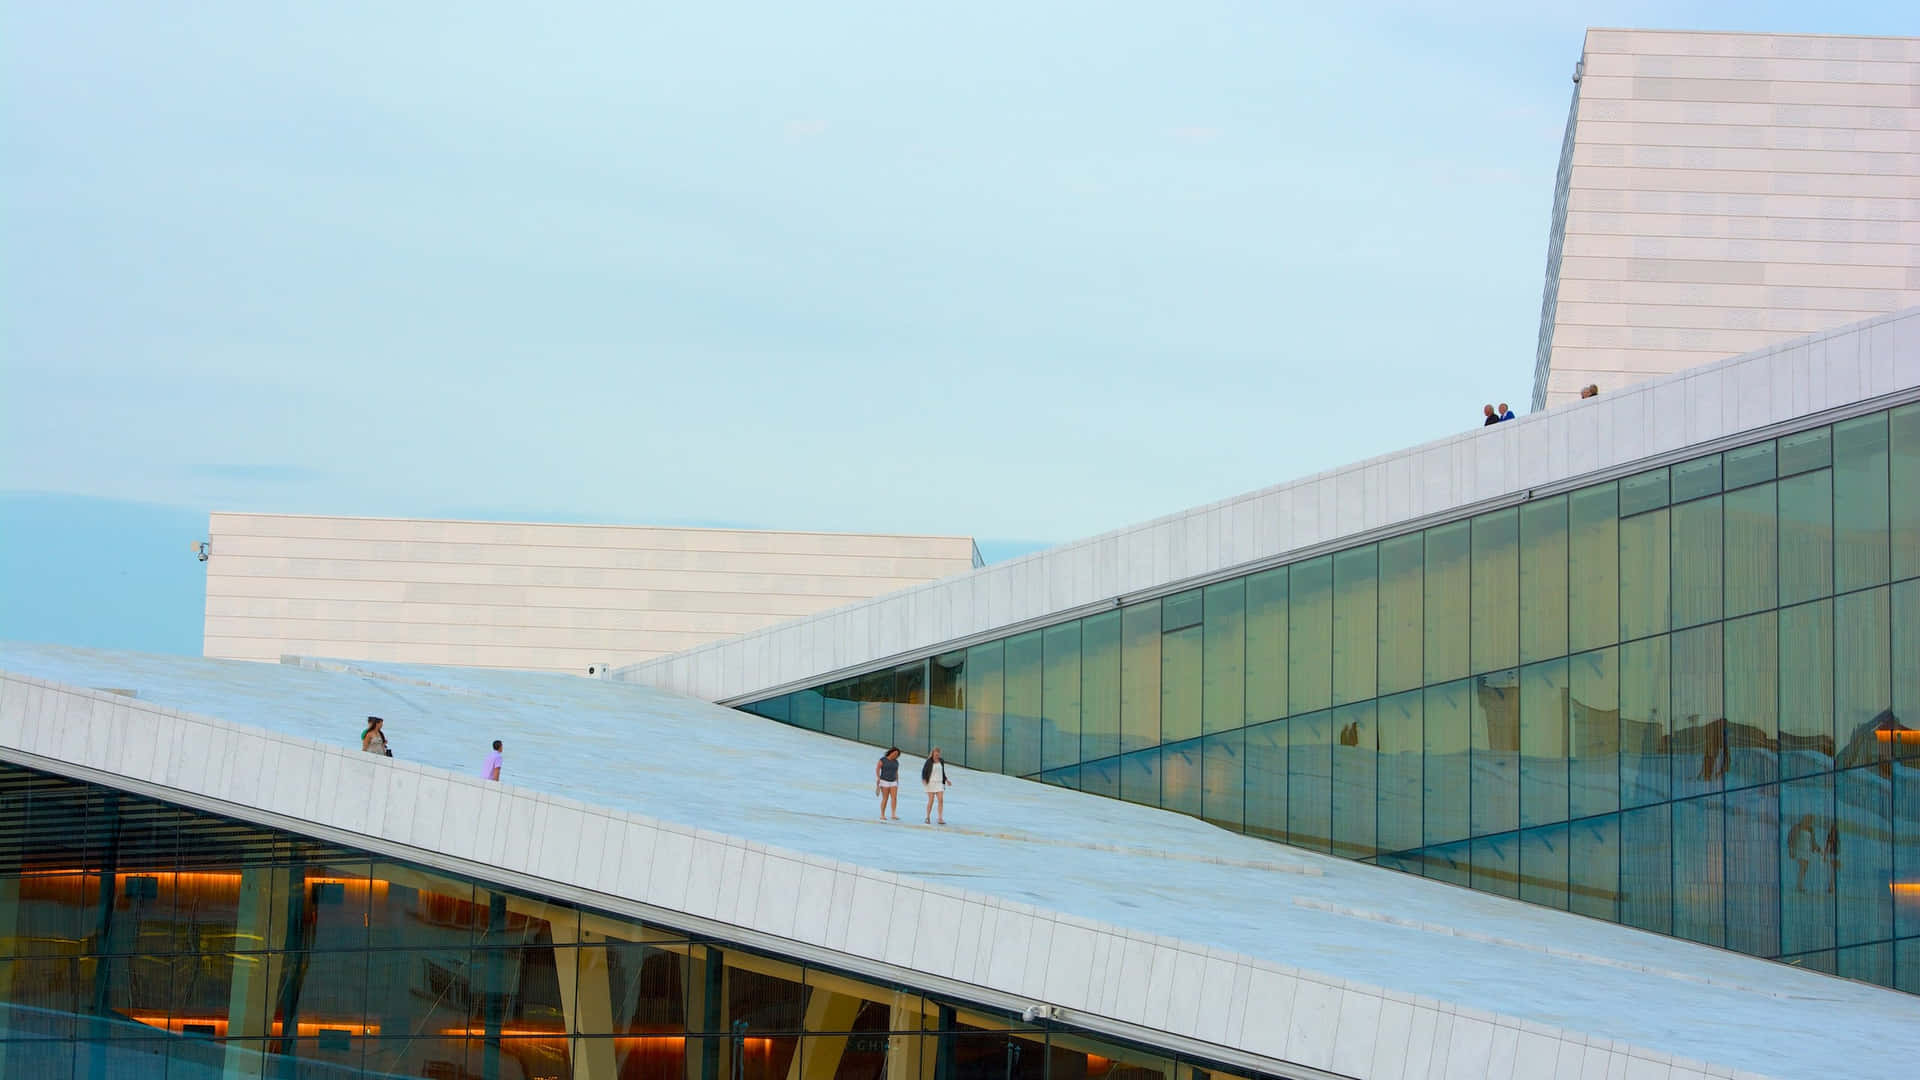 Breathtaking view of the Oslo Opera House bustling with people. Wallpaper